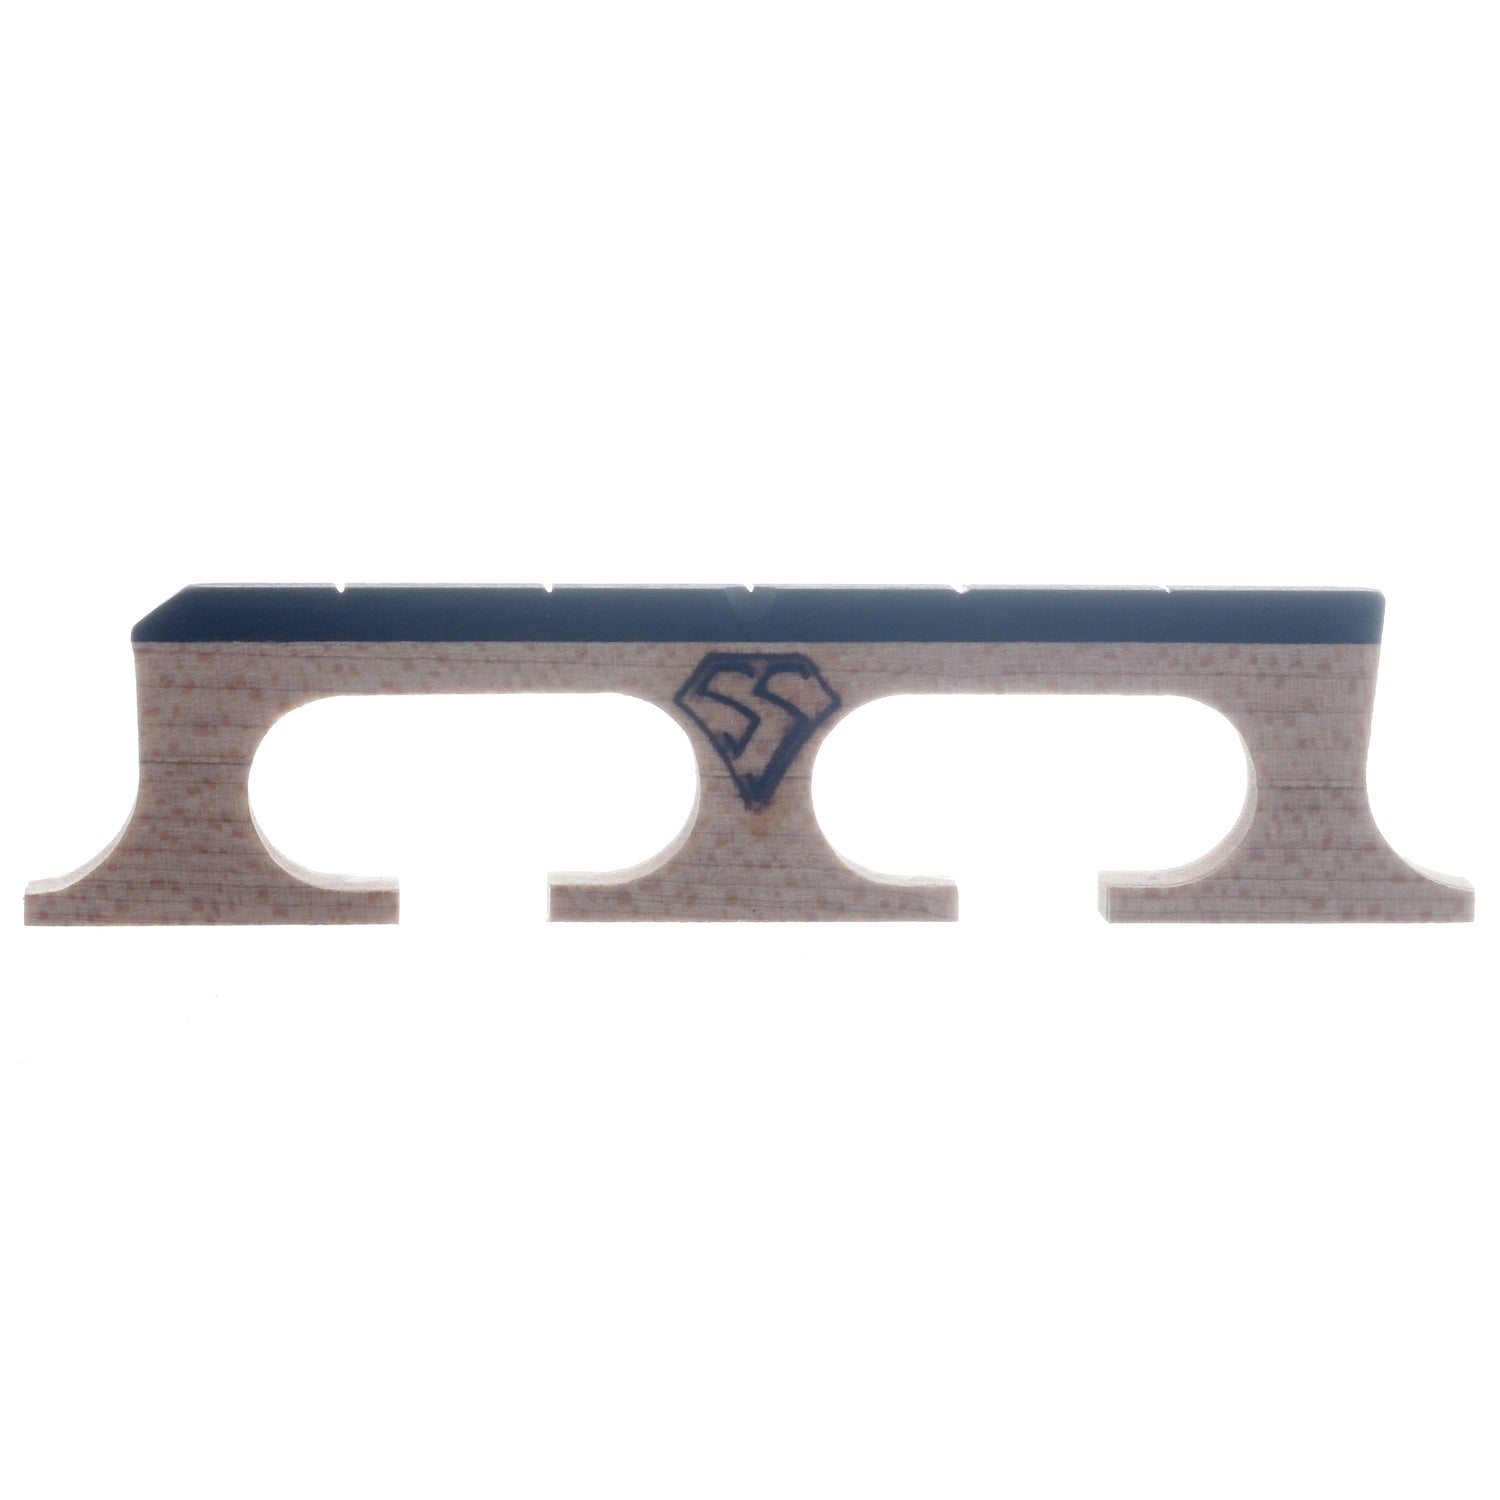 Image 2 of Snuffy Smith New Generation Banjo Bridge, Compensated 11/16" Standard Spaced - SKU# SSCOMP-11/16-S : Product Type Accessories & Parts : Elderly Instruments